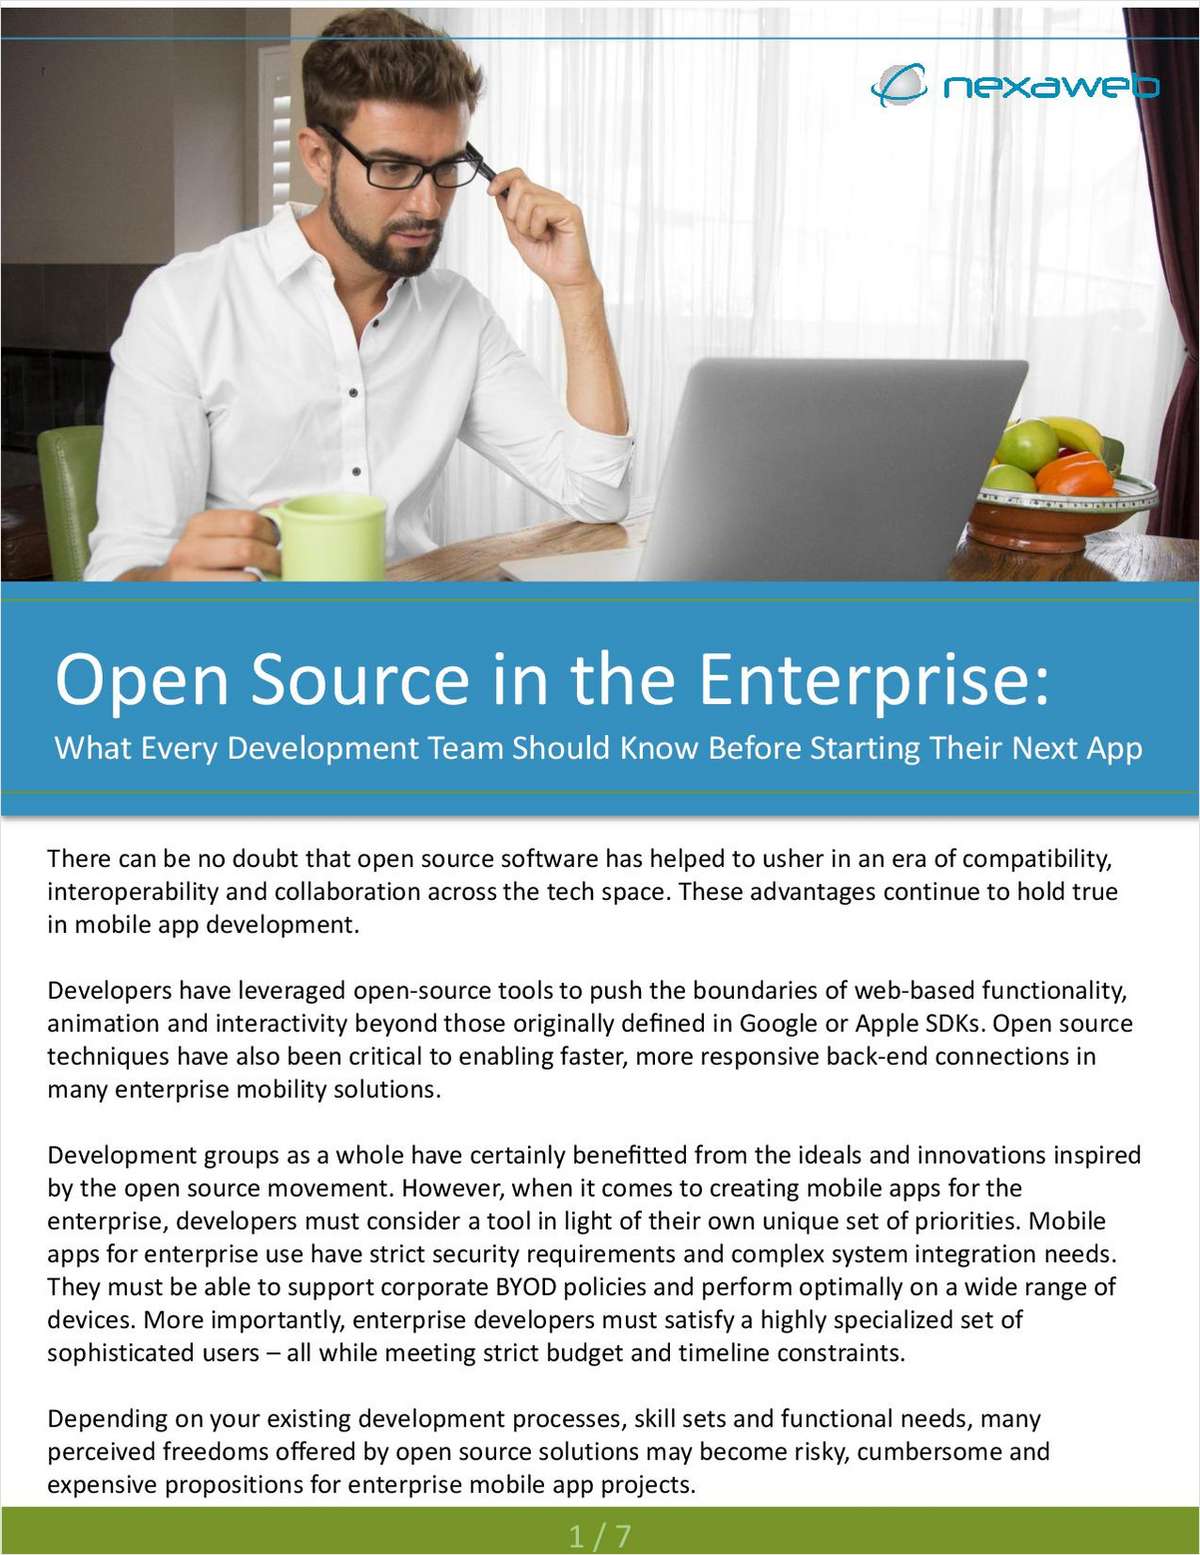 The Benefits of Open Source Software for Developers